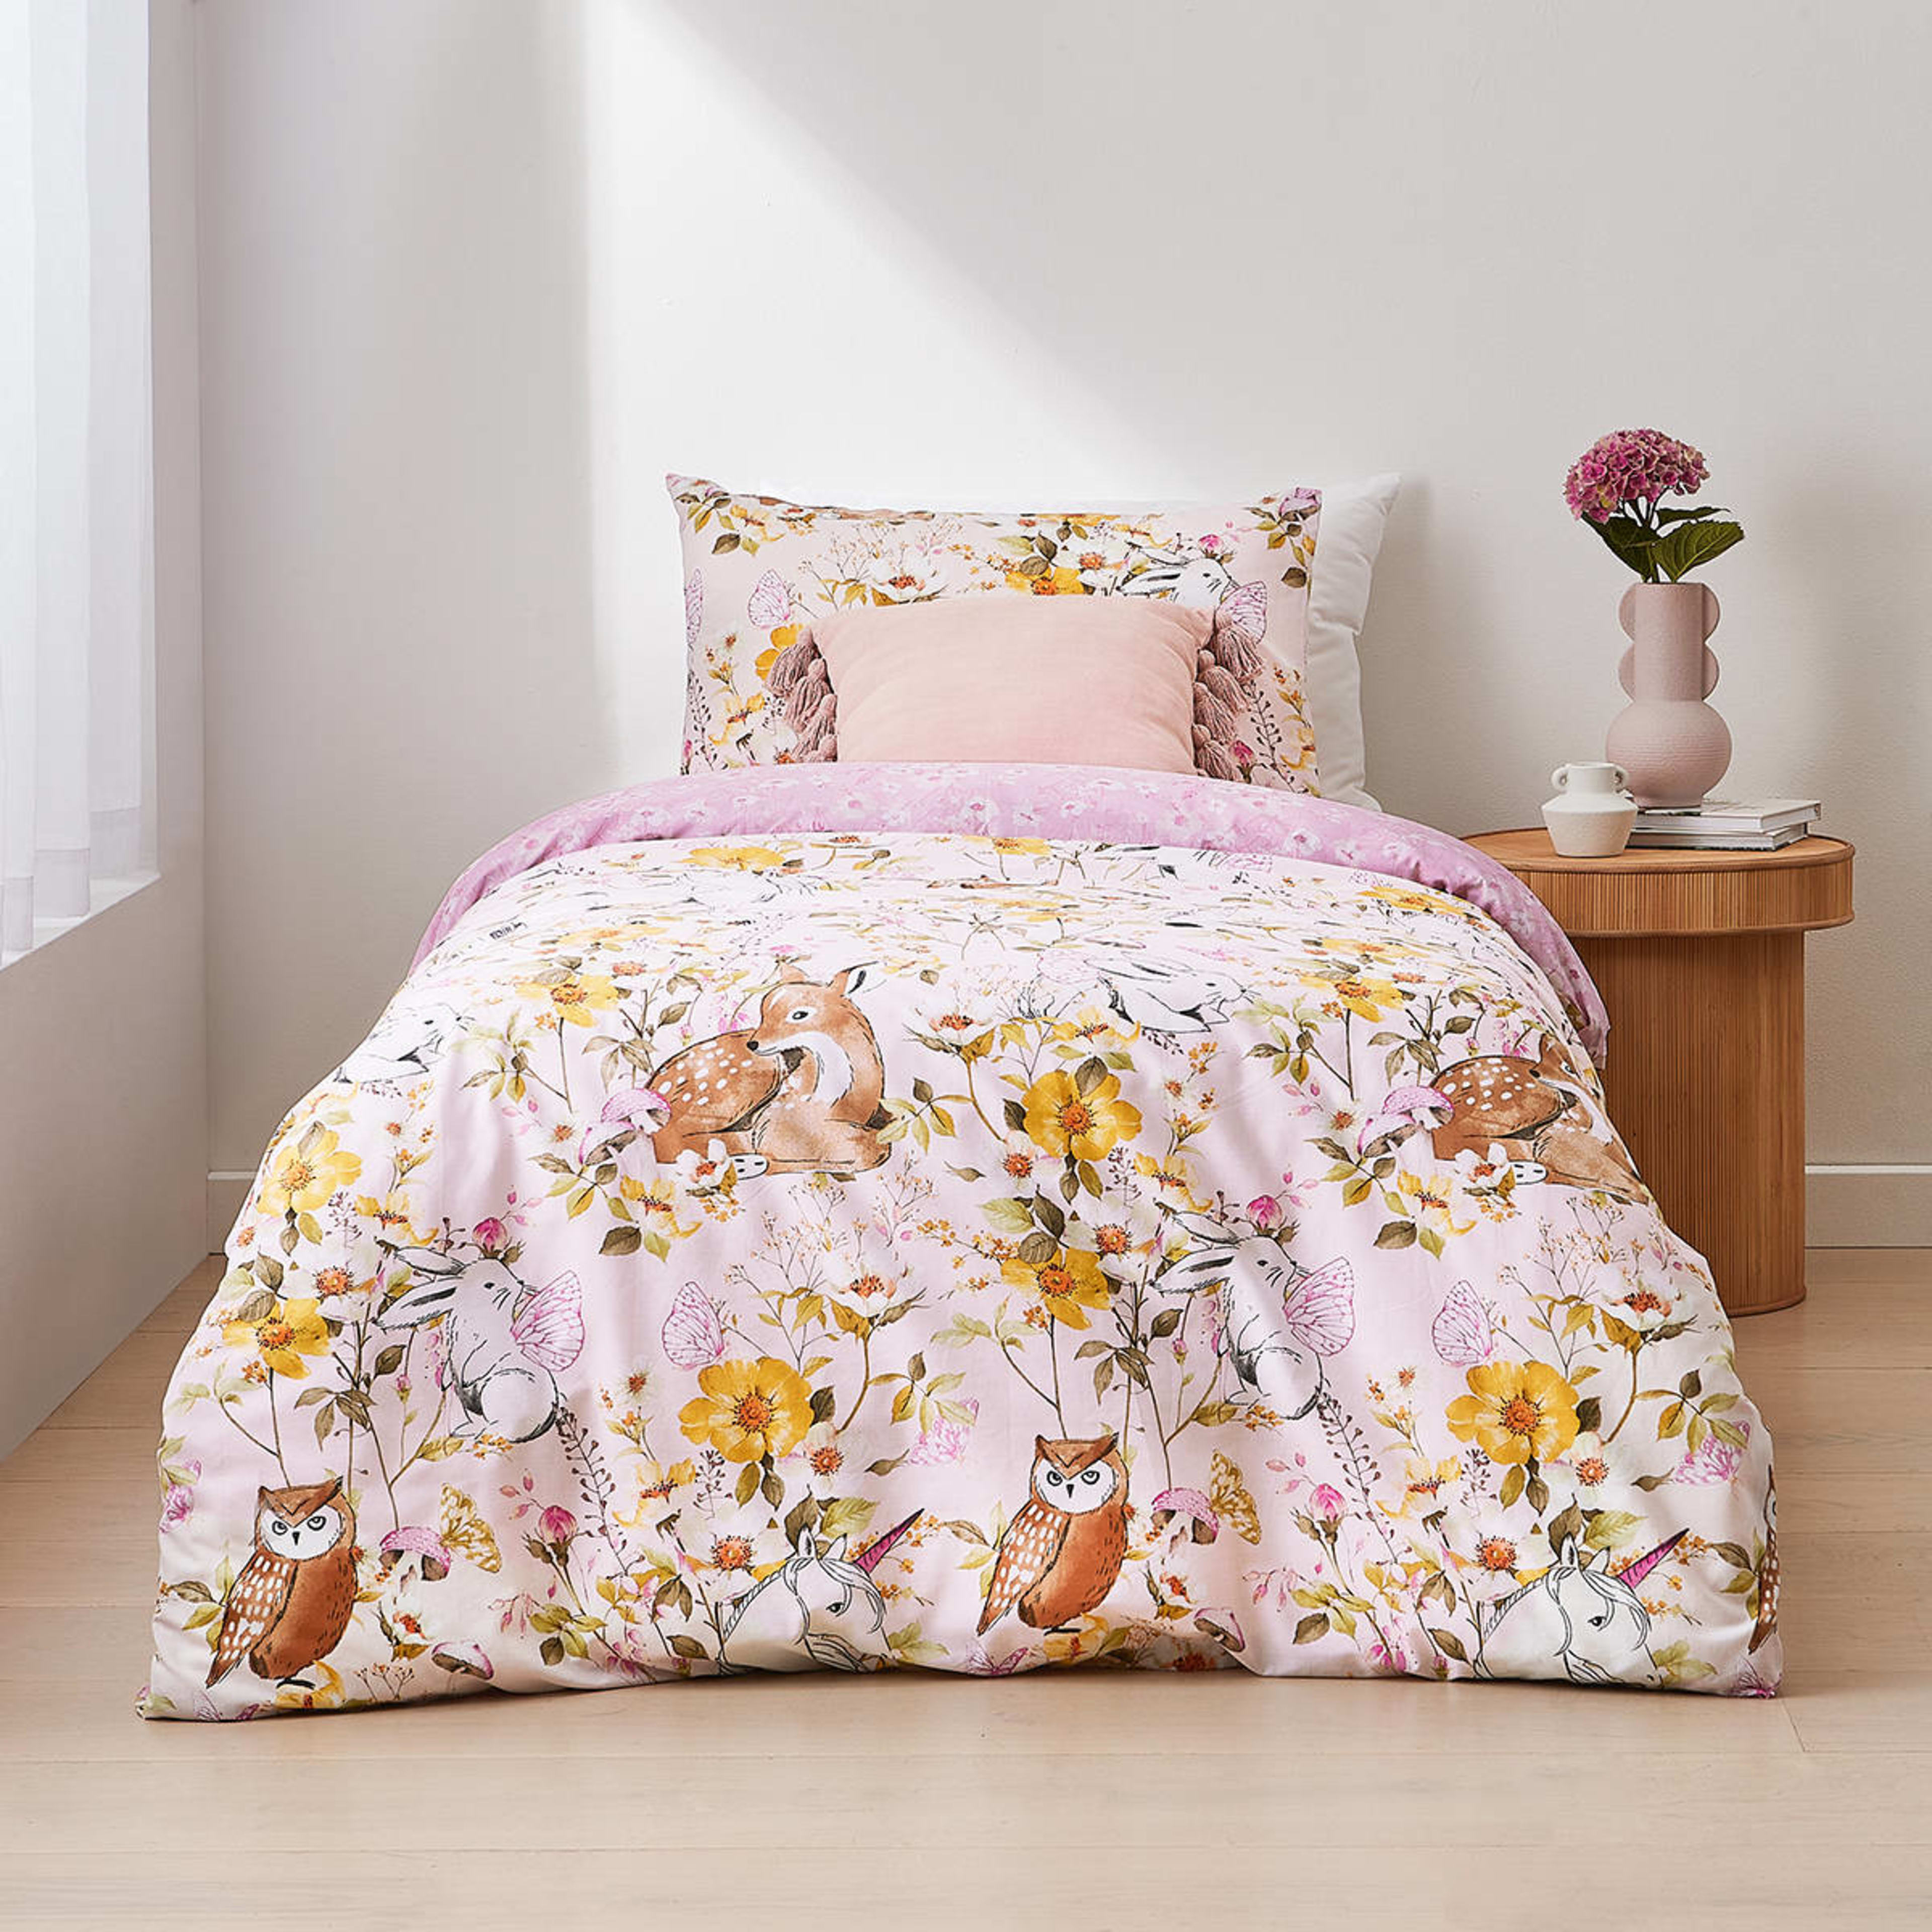 Magical Unicorn Reversible Quilt Cover Set - Single Bed